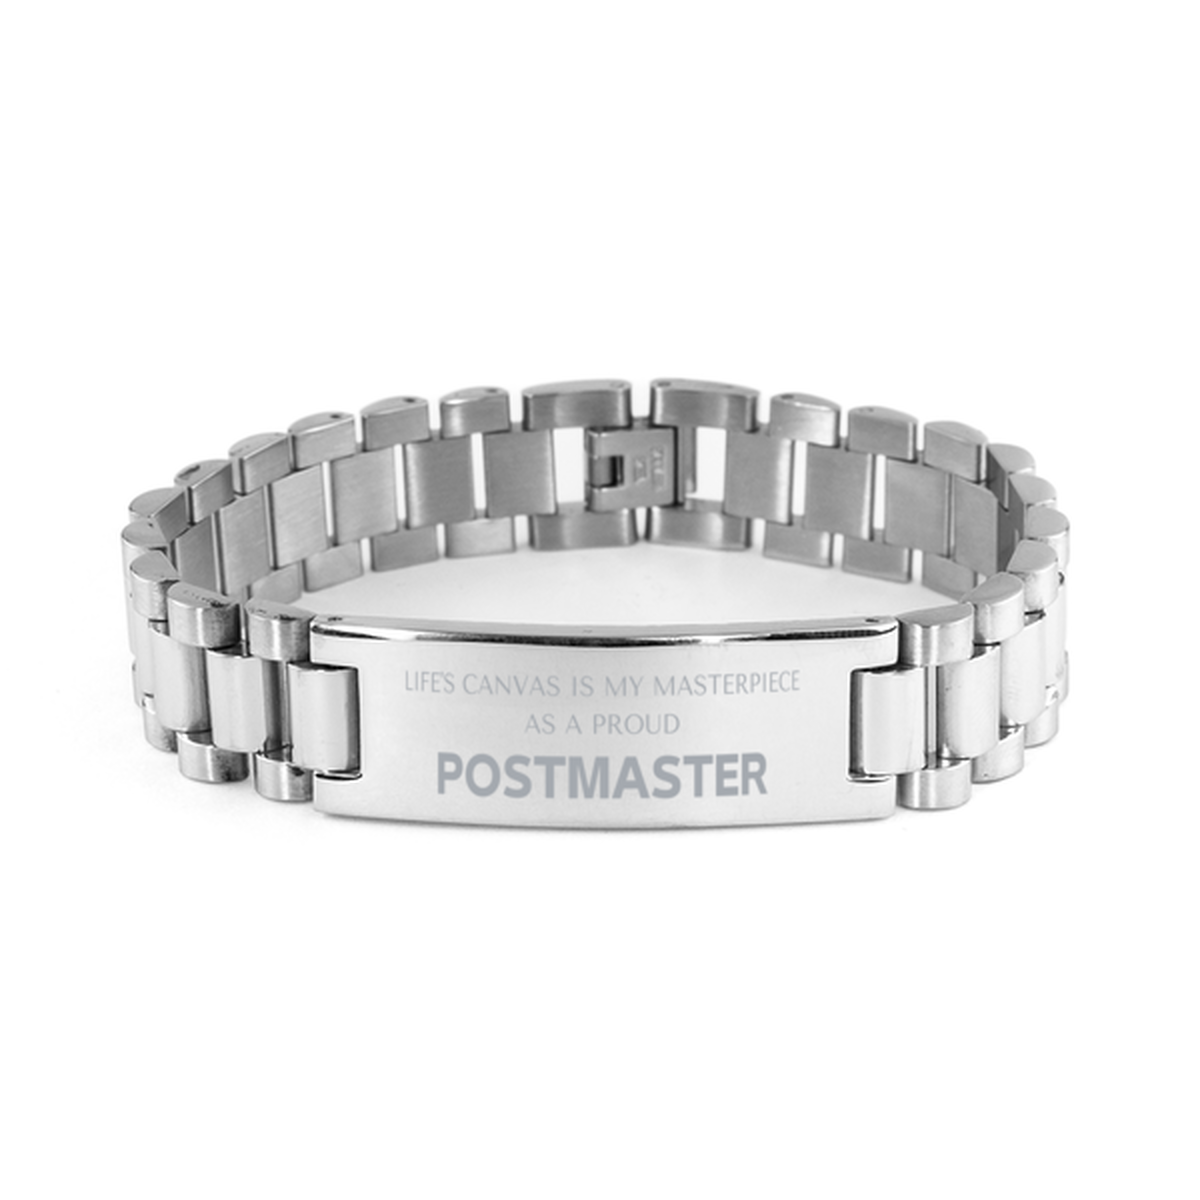 Proud Postmaster Gifts, Life's canvas is my masterpiece, Epic Birthday Christmas Unique Ladder Stainless Steel Bracelet For Postmaster, Coworkers, Men, Women, Friends